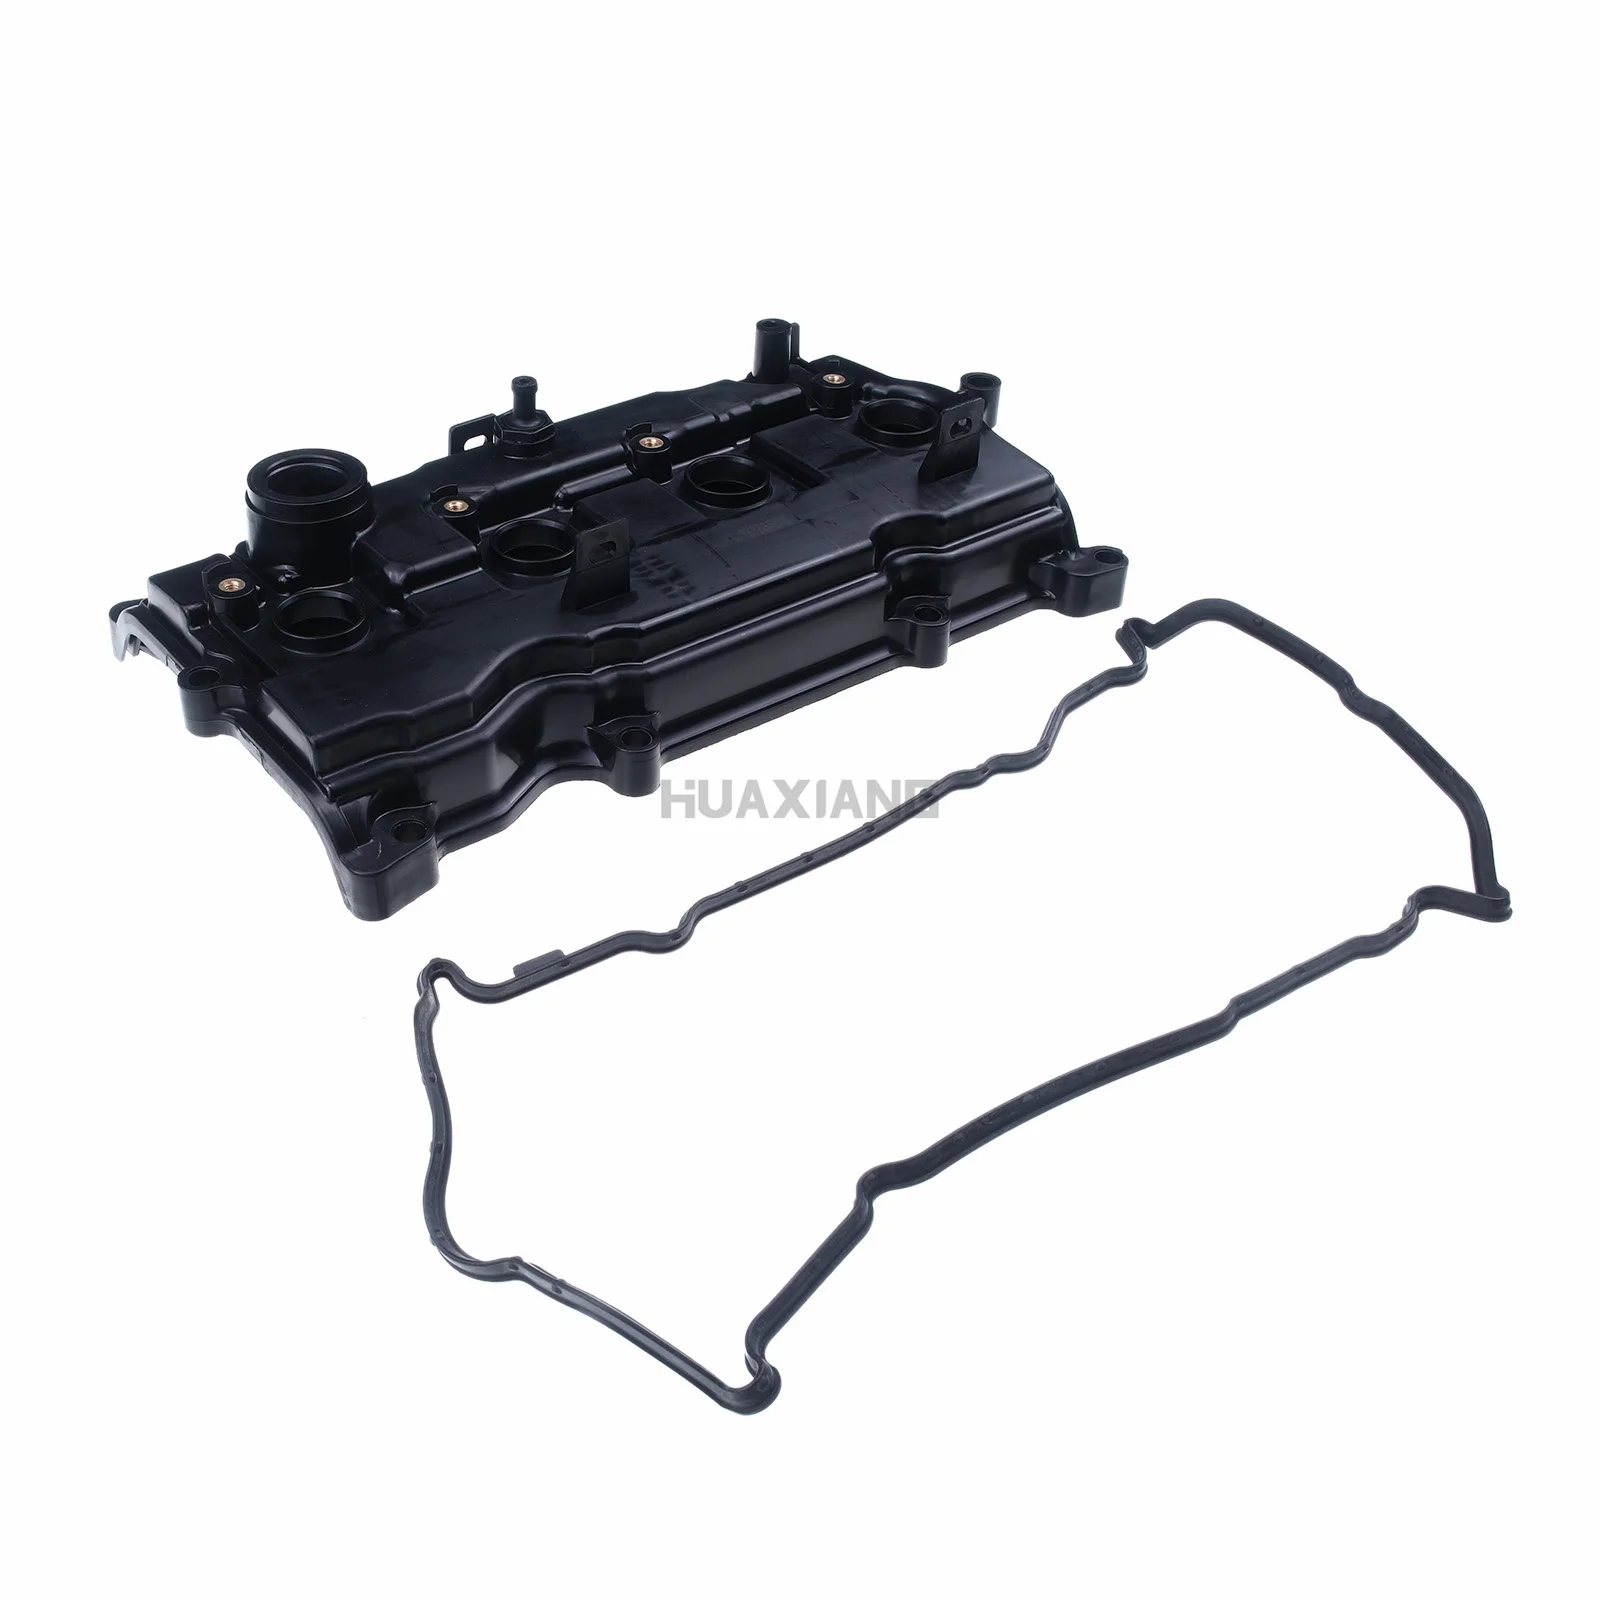 Engine Valve Cover w/ Gasket 13264-3KY0A For Infiniti QX60 Nissan Altima 2.5L L4